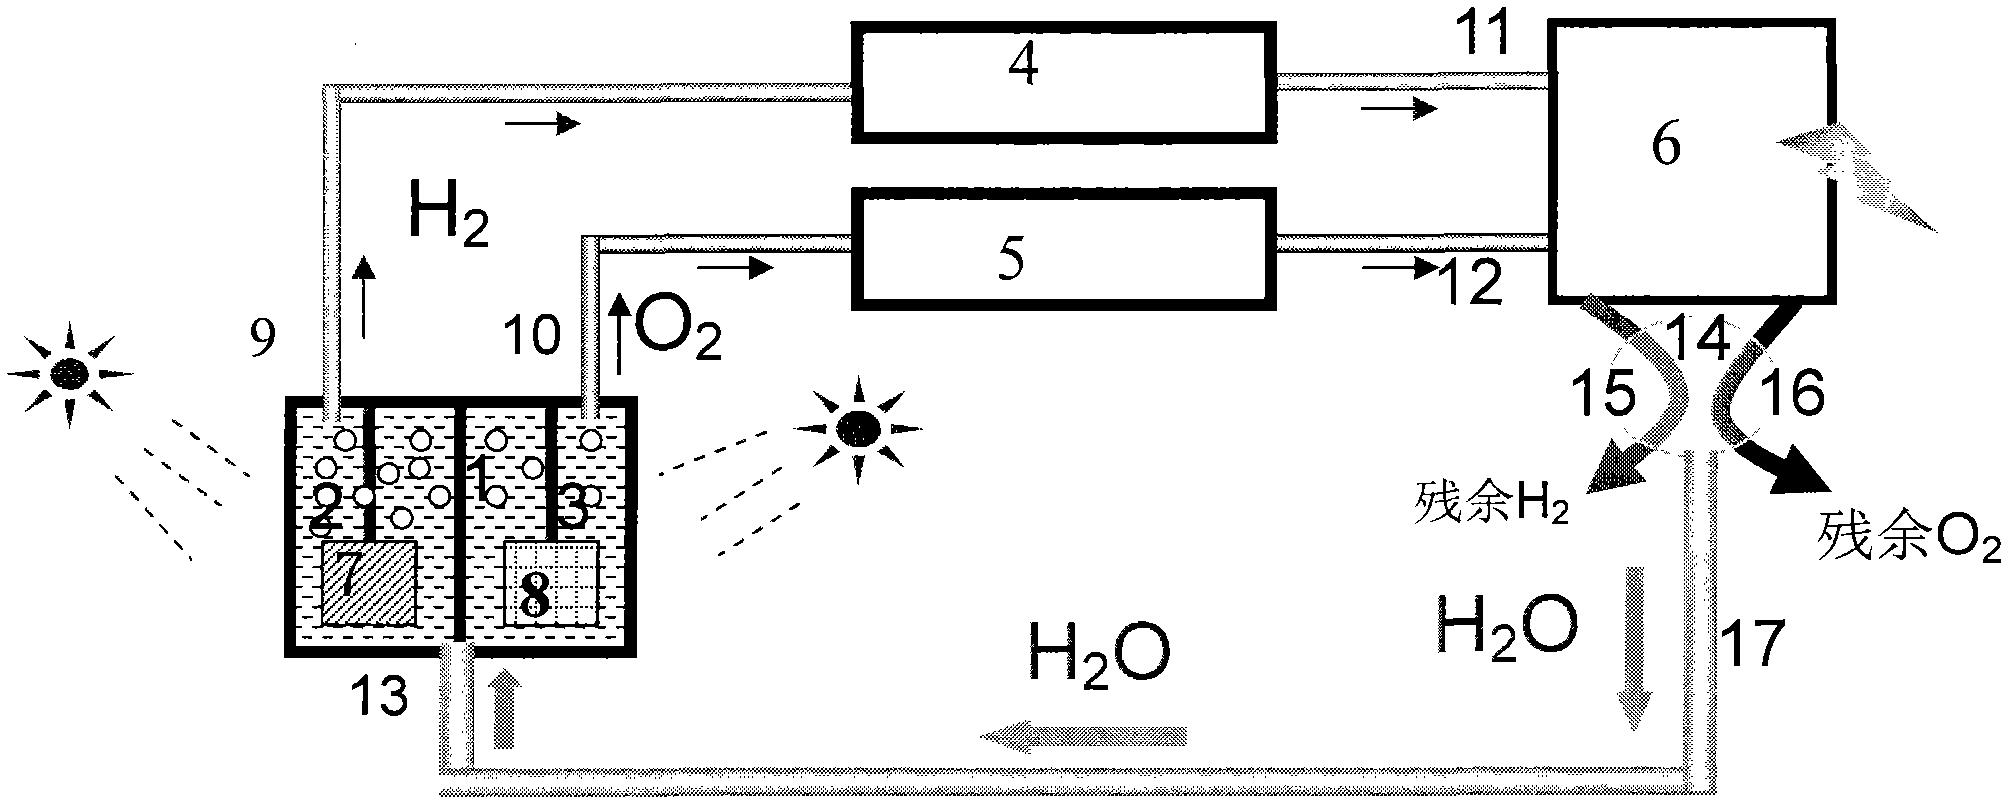 Solar energy storage system with coupled photo(electro)chemical cell and fuel cell